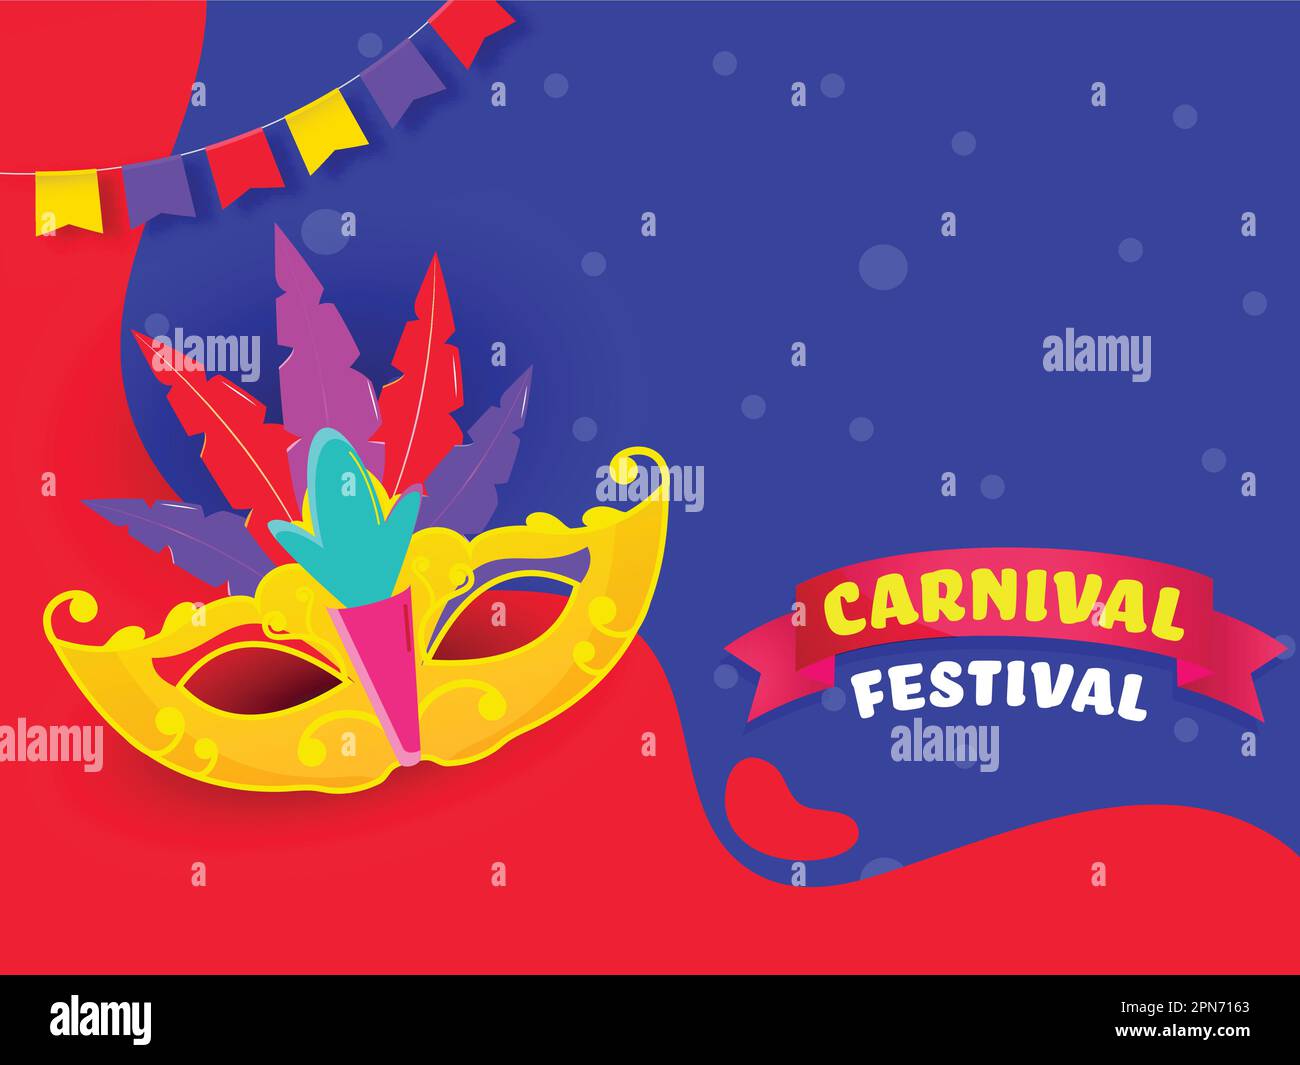 Carnival Festival Poster Design With Colorful Feather Mask On Red And Blue Background. Stock Vector